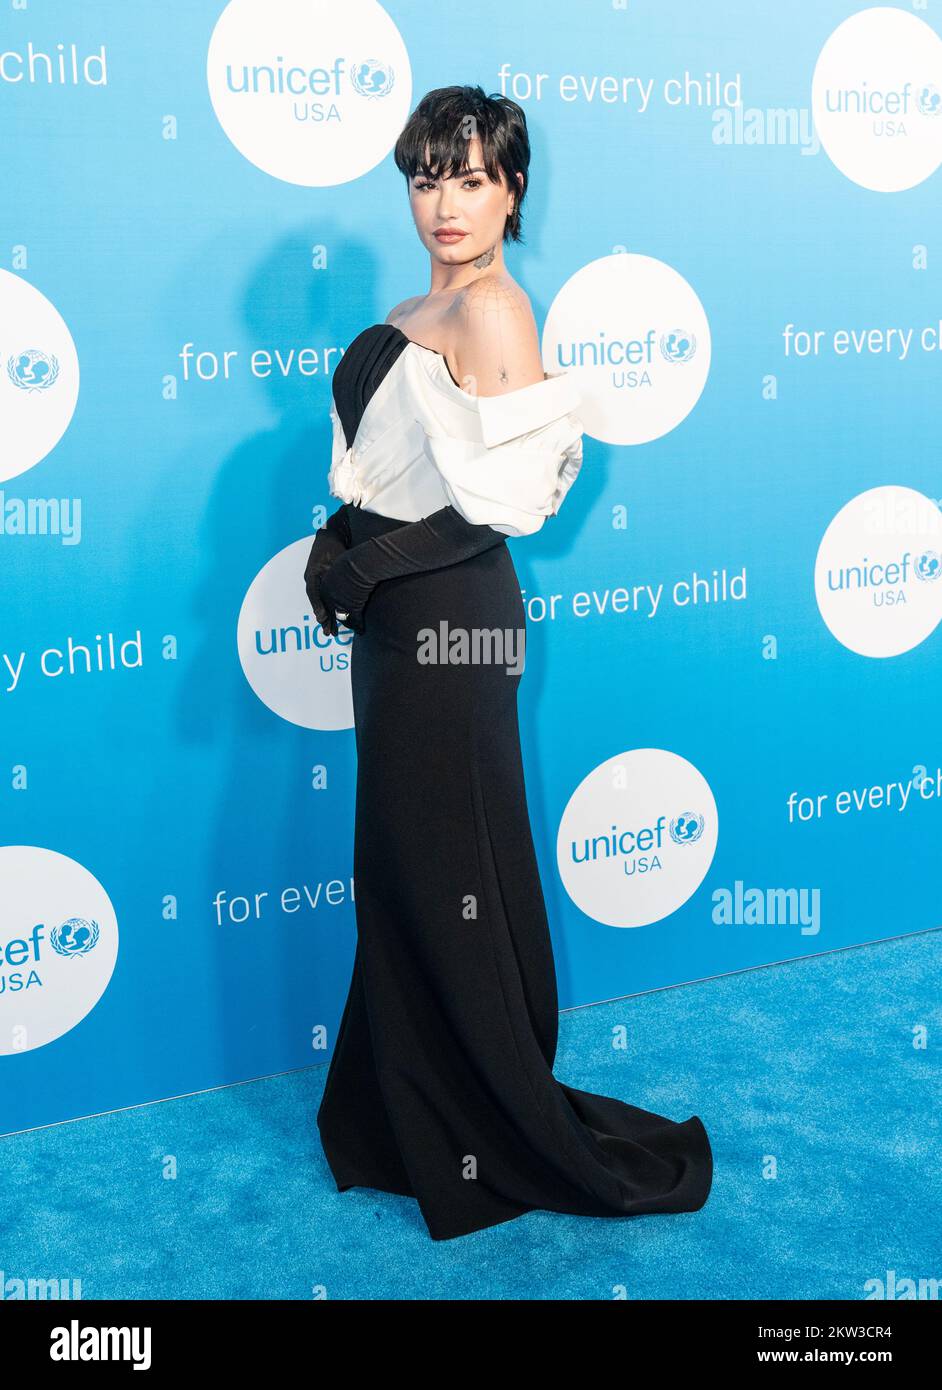 Demi Lovato wearing dress by Hellessy attends the 2022 UNICEF Gala at The Glasshouse in New York on November 29, 2022 Stock Photo